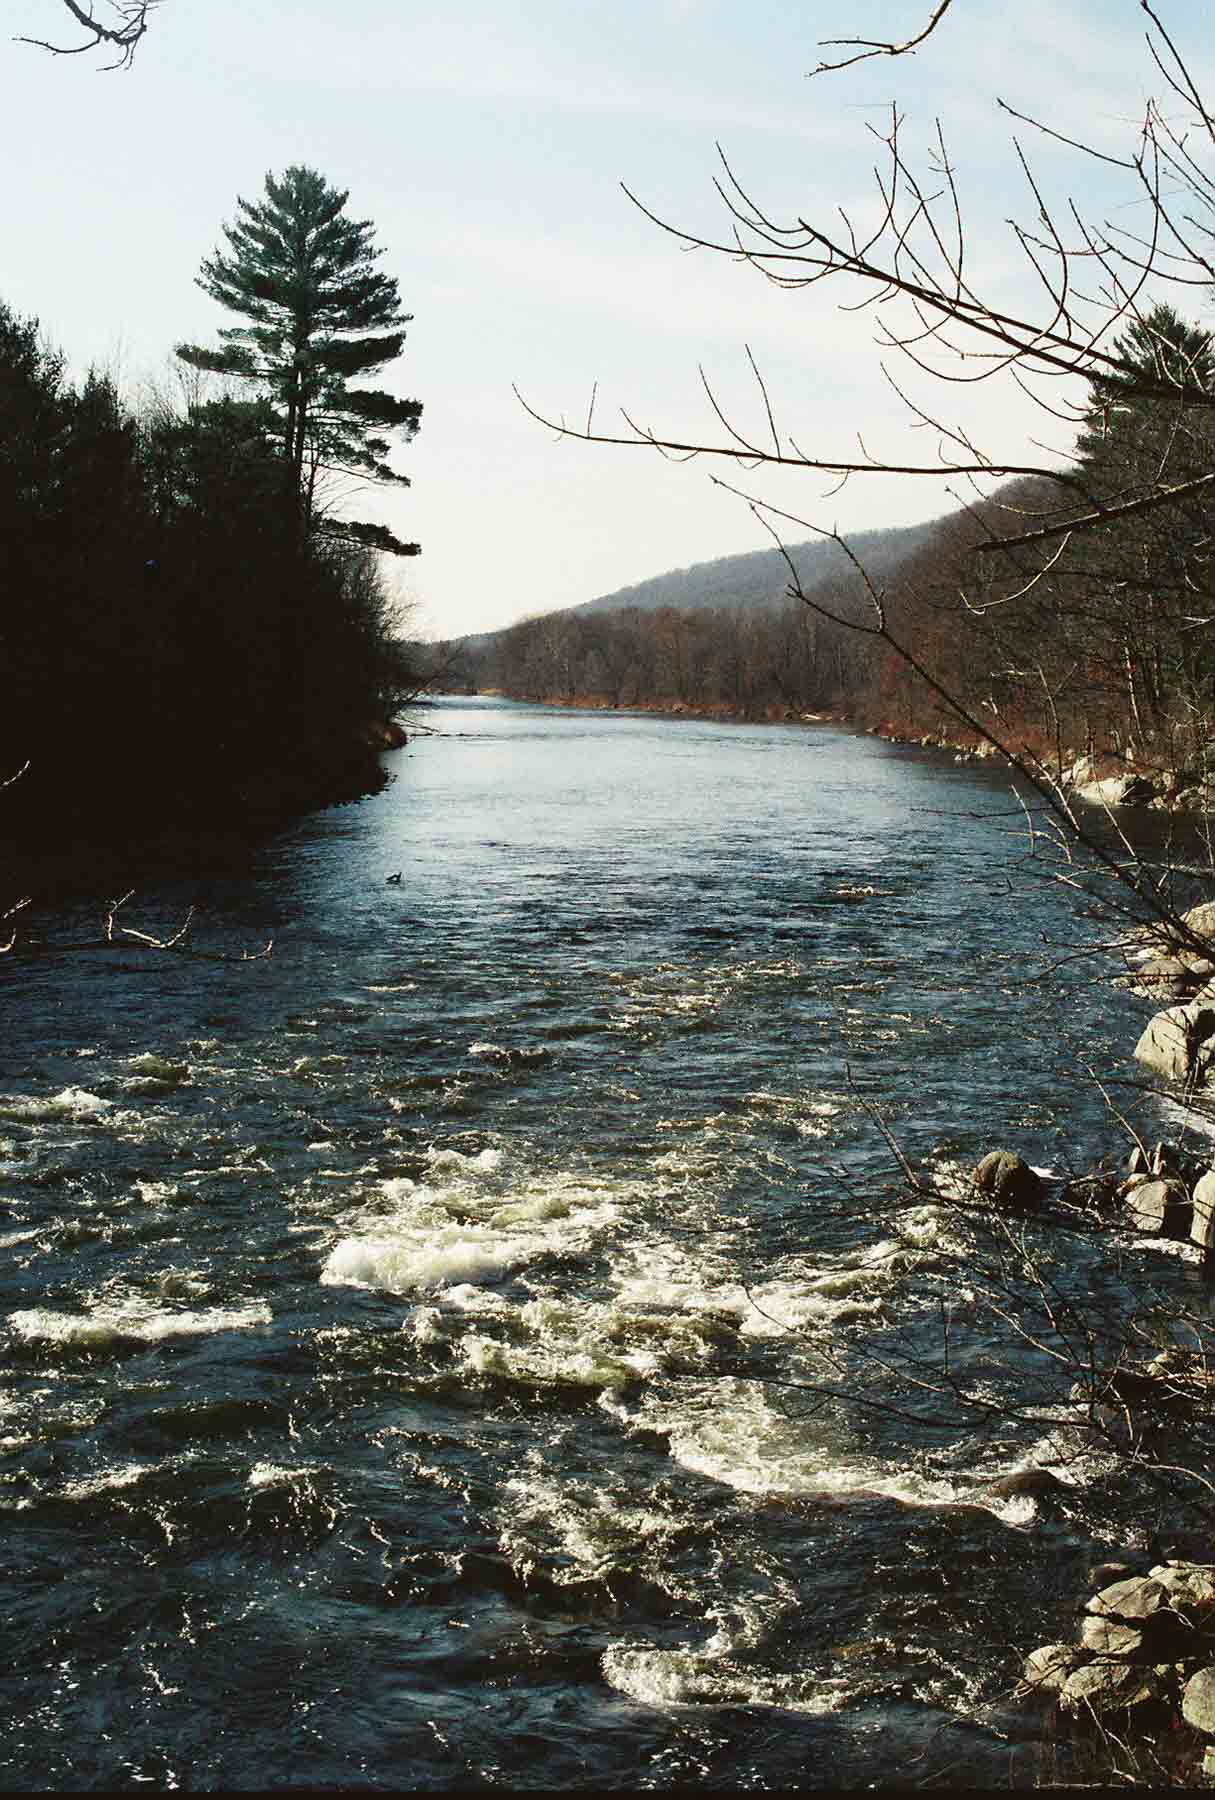 mm 1.7 - Looking south along the Housatonic River at the Swift Bridge site. For almost five files to the south the trail follows the west bank of the river closely, mostly along an old road, most of which has long been closed to traffic.  Courtesy dlcul@conncoll.edu